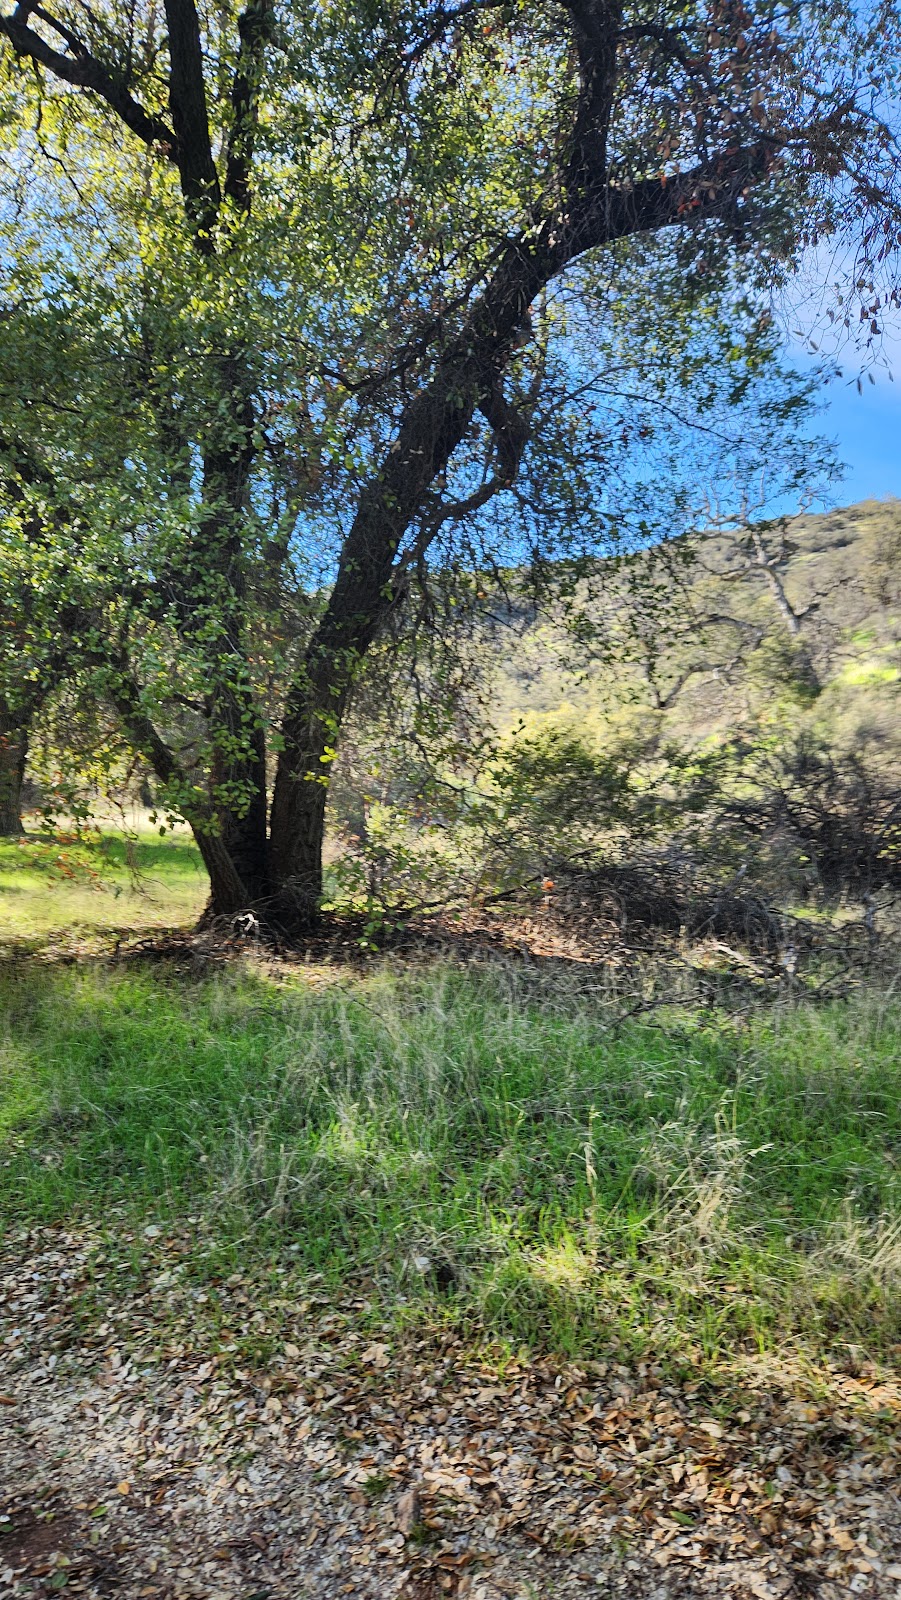 Aliso Park Campground | Aliso Park Rd, New Cuyama, CA 93254, USA | Phone: (661) 245-3731 ext. 0